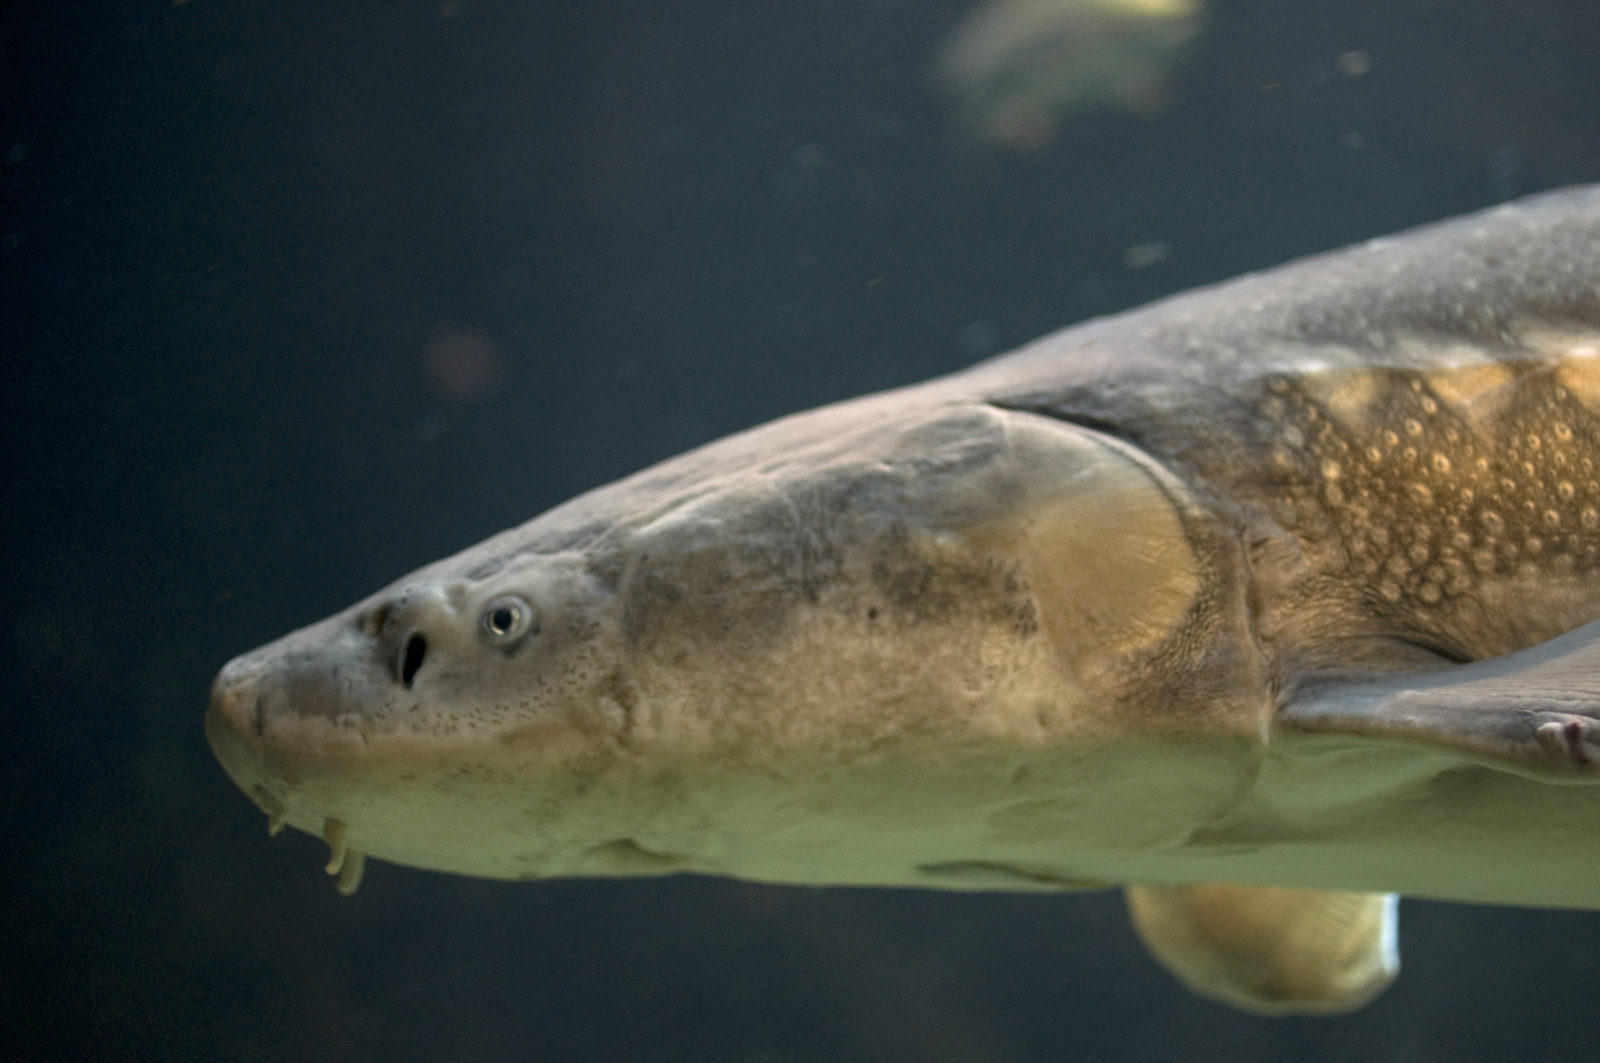 A white sturgeon with worn-down barbells—the whisker-like organs that dangle in front of its mouth. Sturgeon use barbells as well as external taste buds to detect morsels in the mudflats. (Photo by Andrea Shreier)